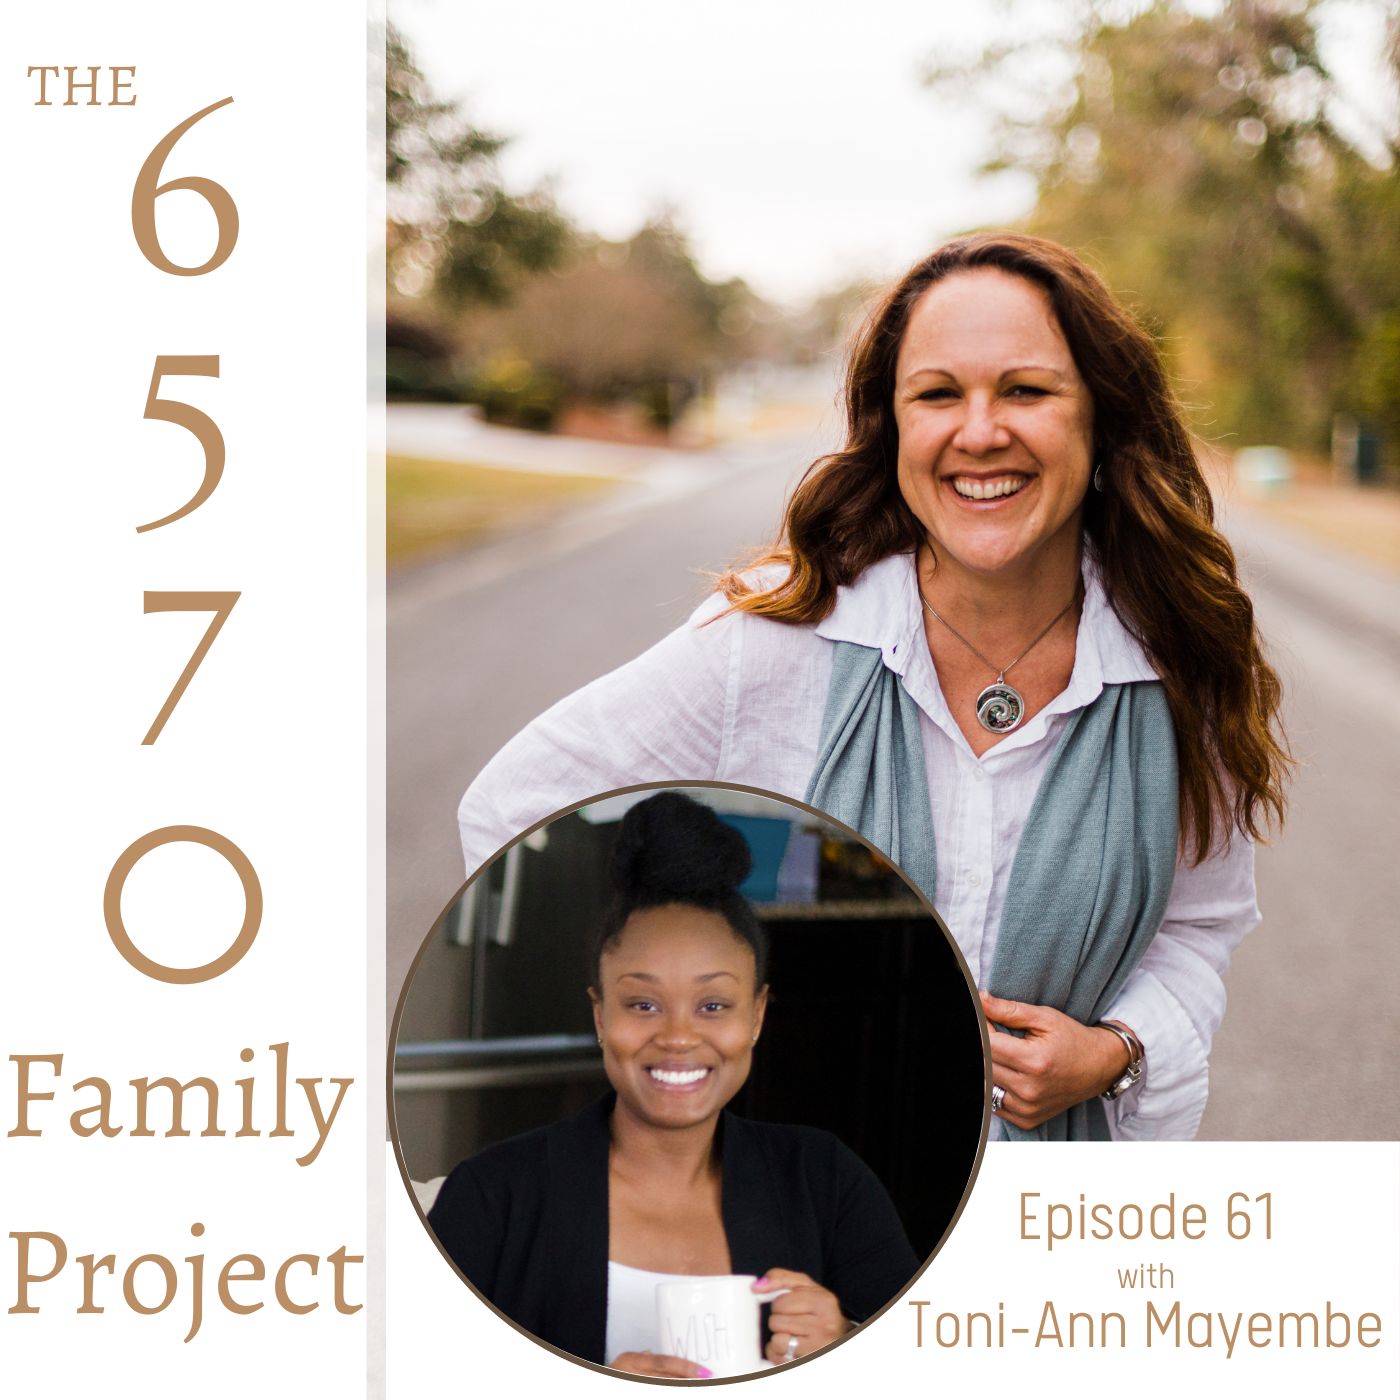 How To Prepare For An Amazing Week Every Time with Guest Toni-Ann Mayembe